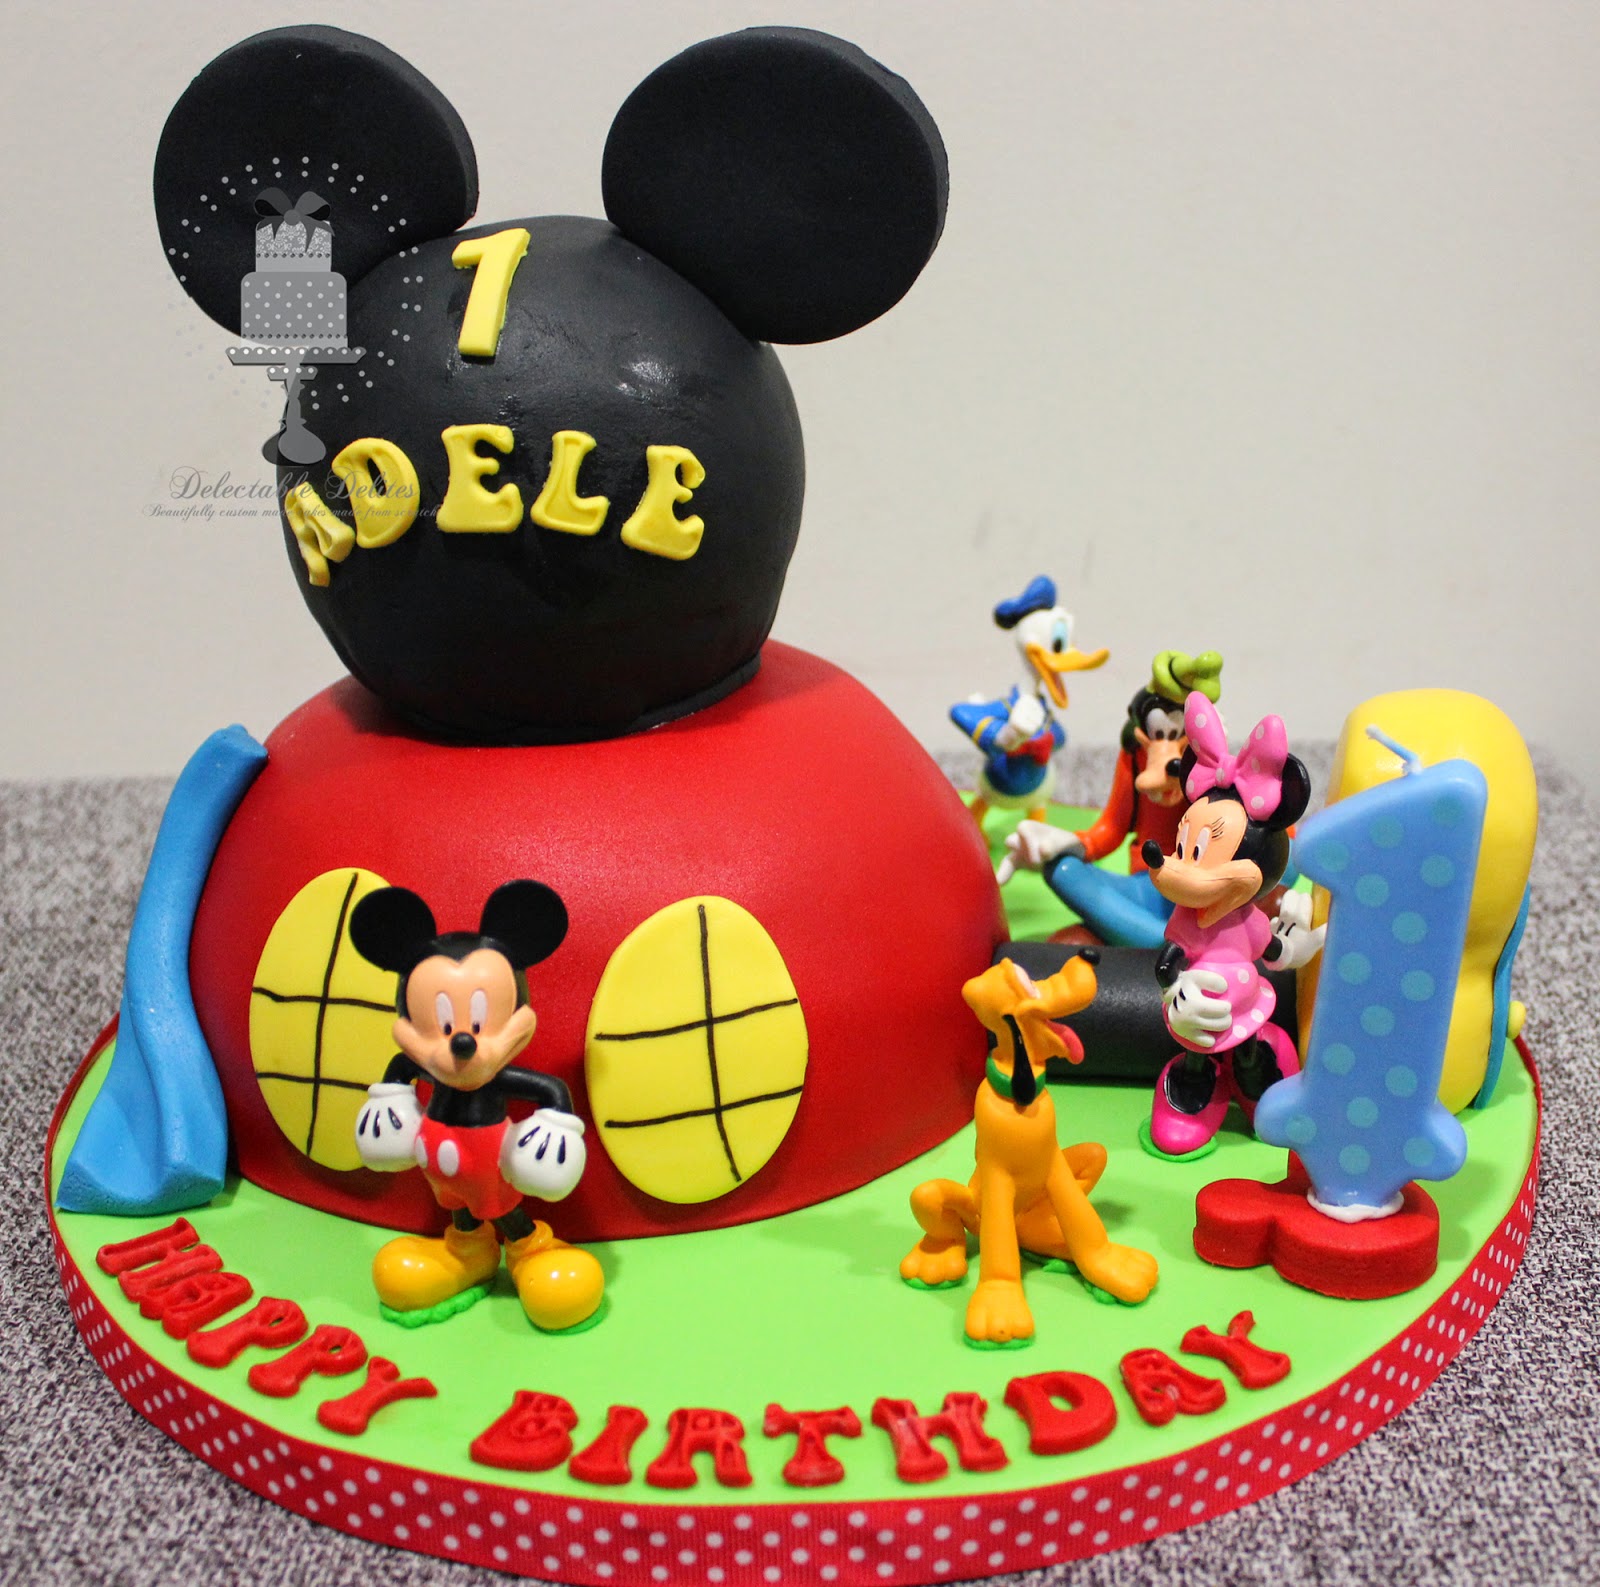 Delectable Delites Mickey Mouse Clubhouse Cake For Adele S 1st Birthday